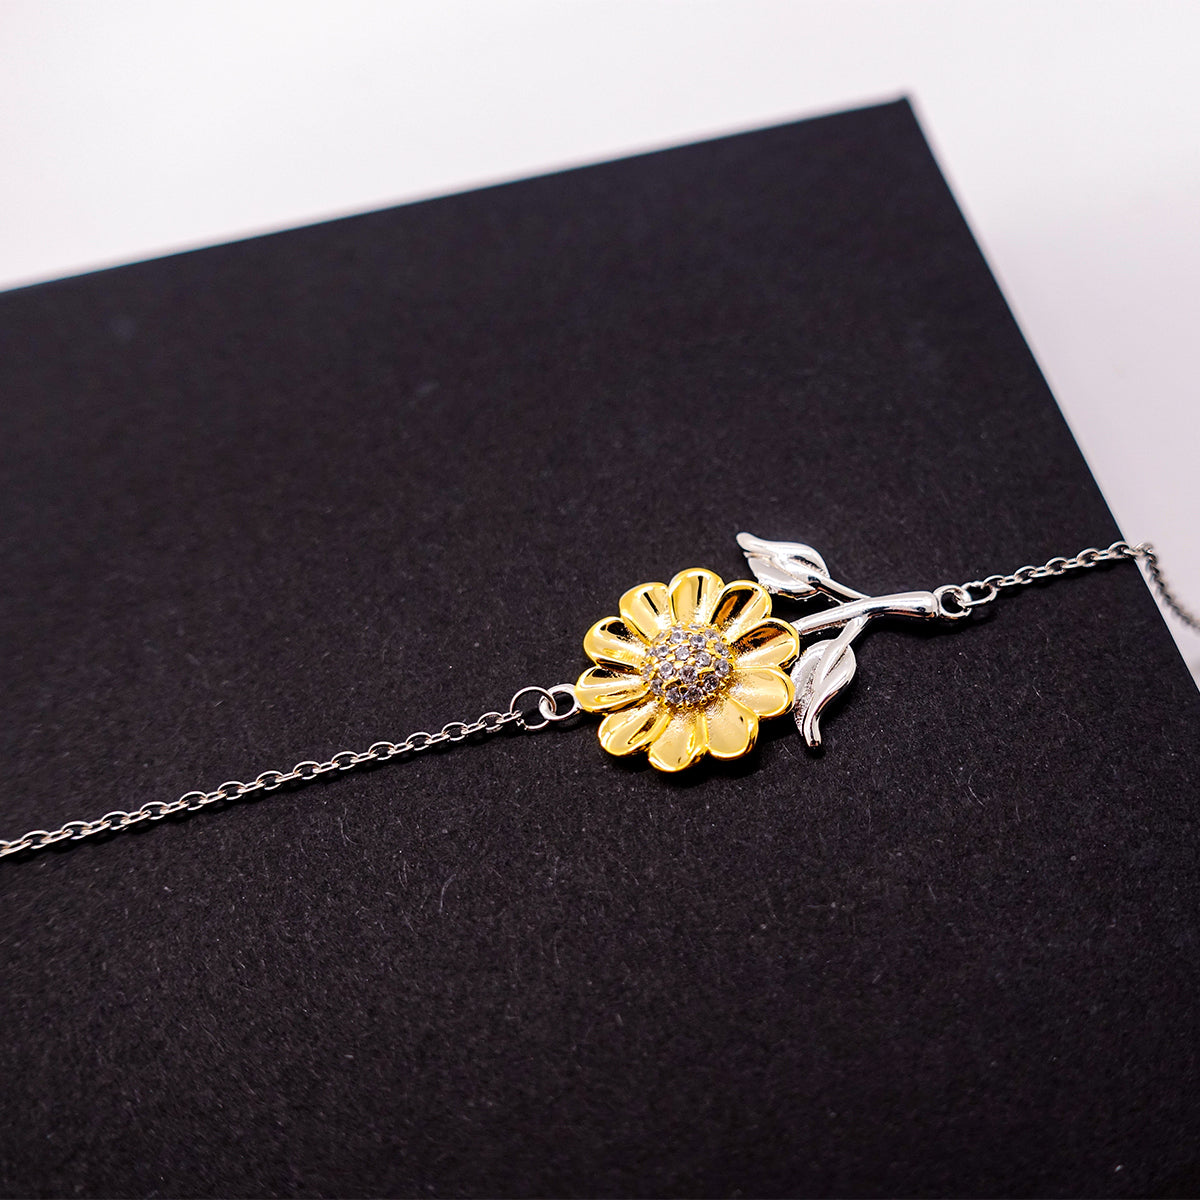 Big-Brother Sunflower Bracelet - Always in my Heart - Unique Gift for Birthday or Graduation